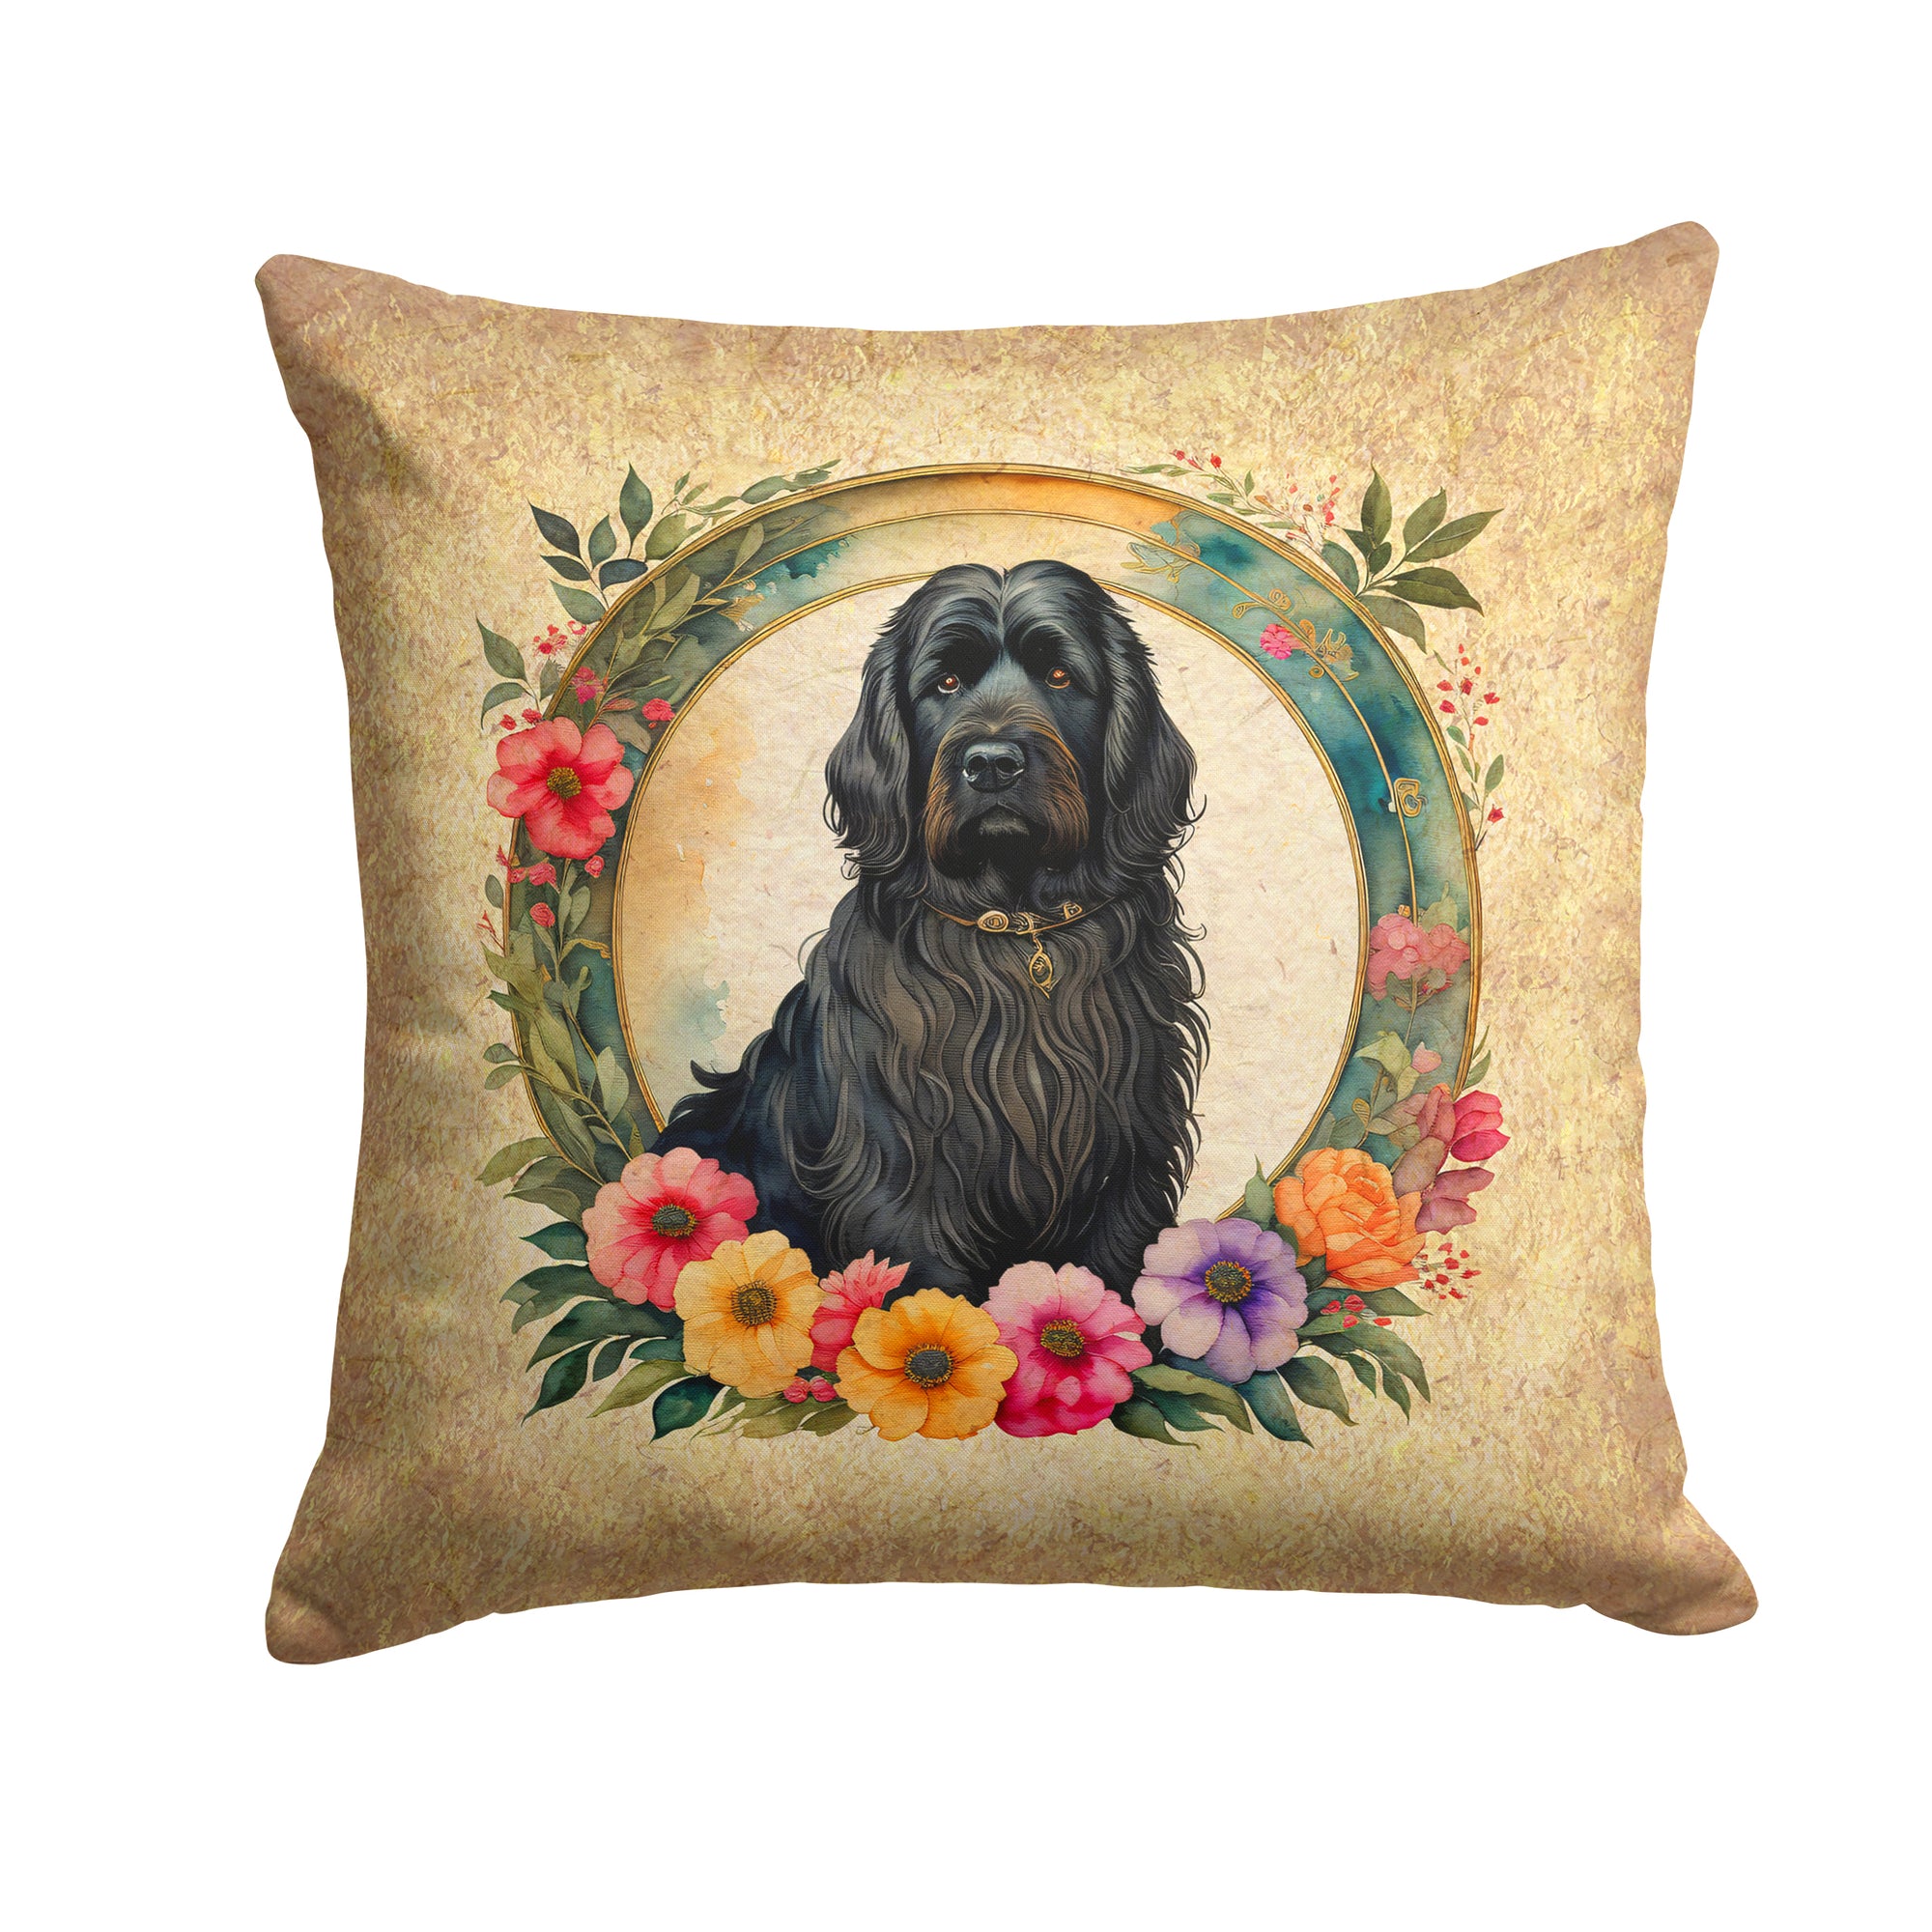 Buy this Briard and Flowers Fabric Decorative Pillow